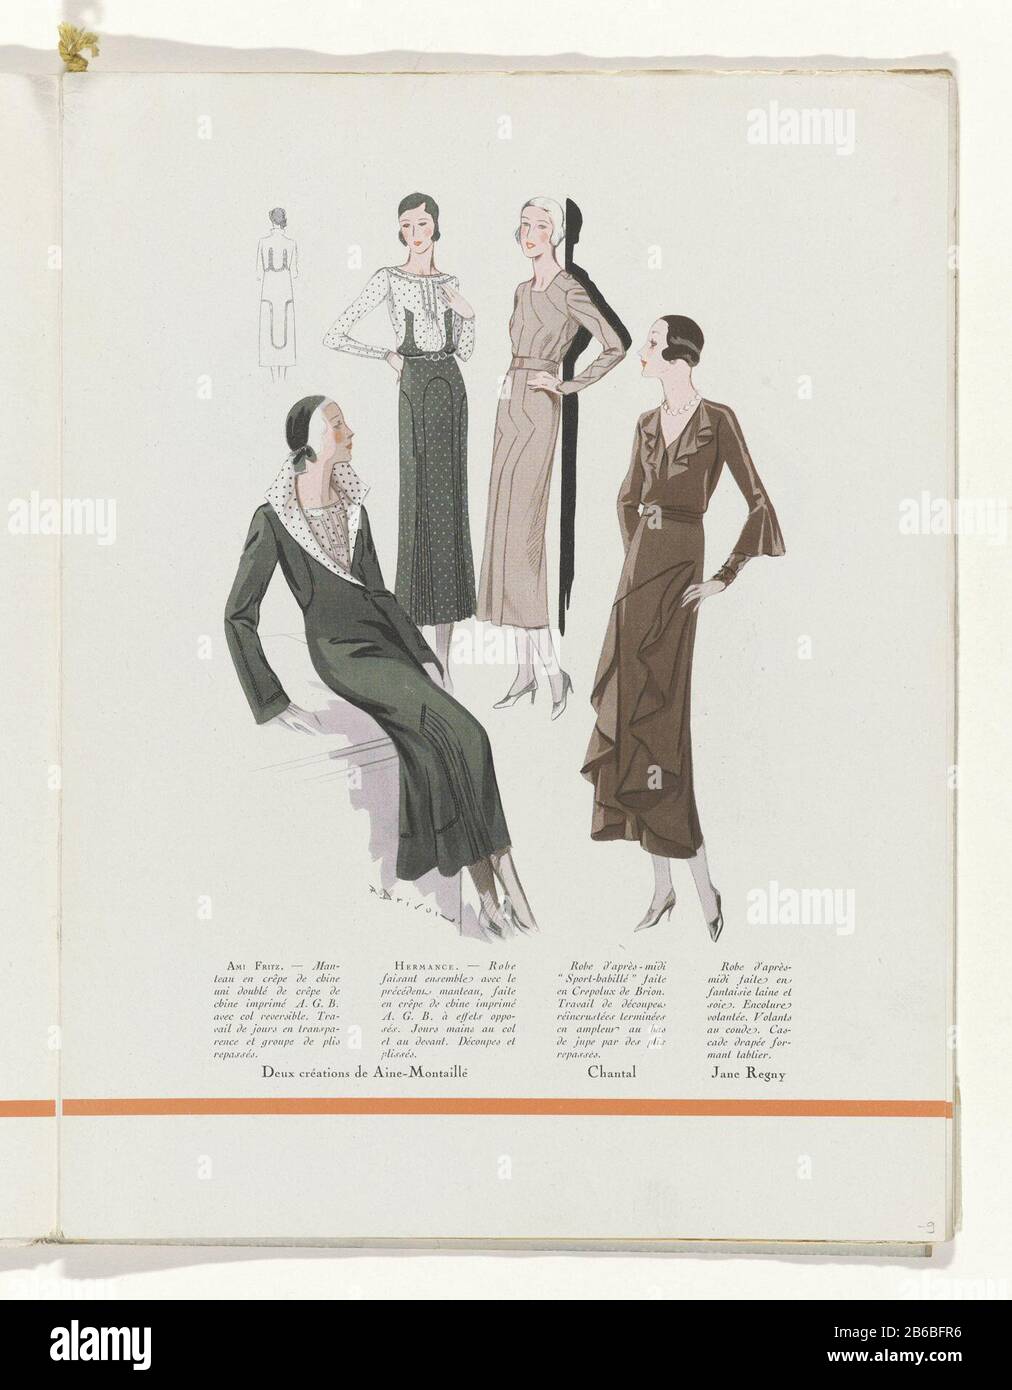 Left: ensemble consisting of a jacket and of printed dress "crepe de chine  A.G.B. ' Aine-Montaillé. Middle: afternoon frock Sports habillé of  'Crepolux' dust Paul Brion and design of Chantal. Right: afternoon